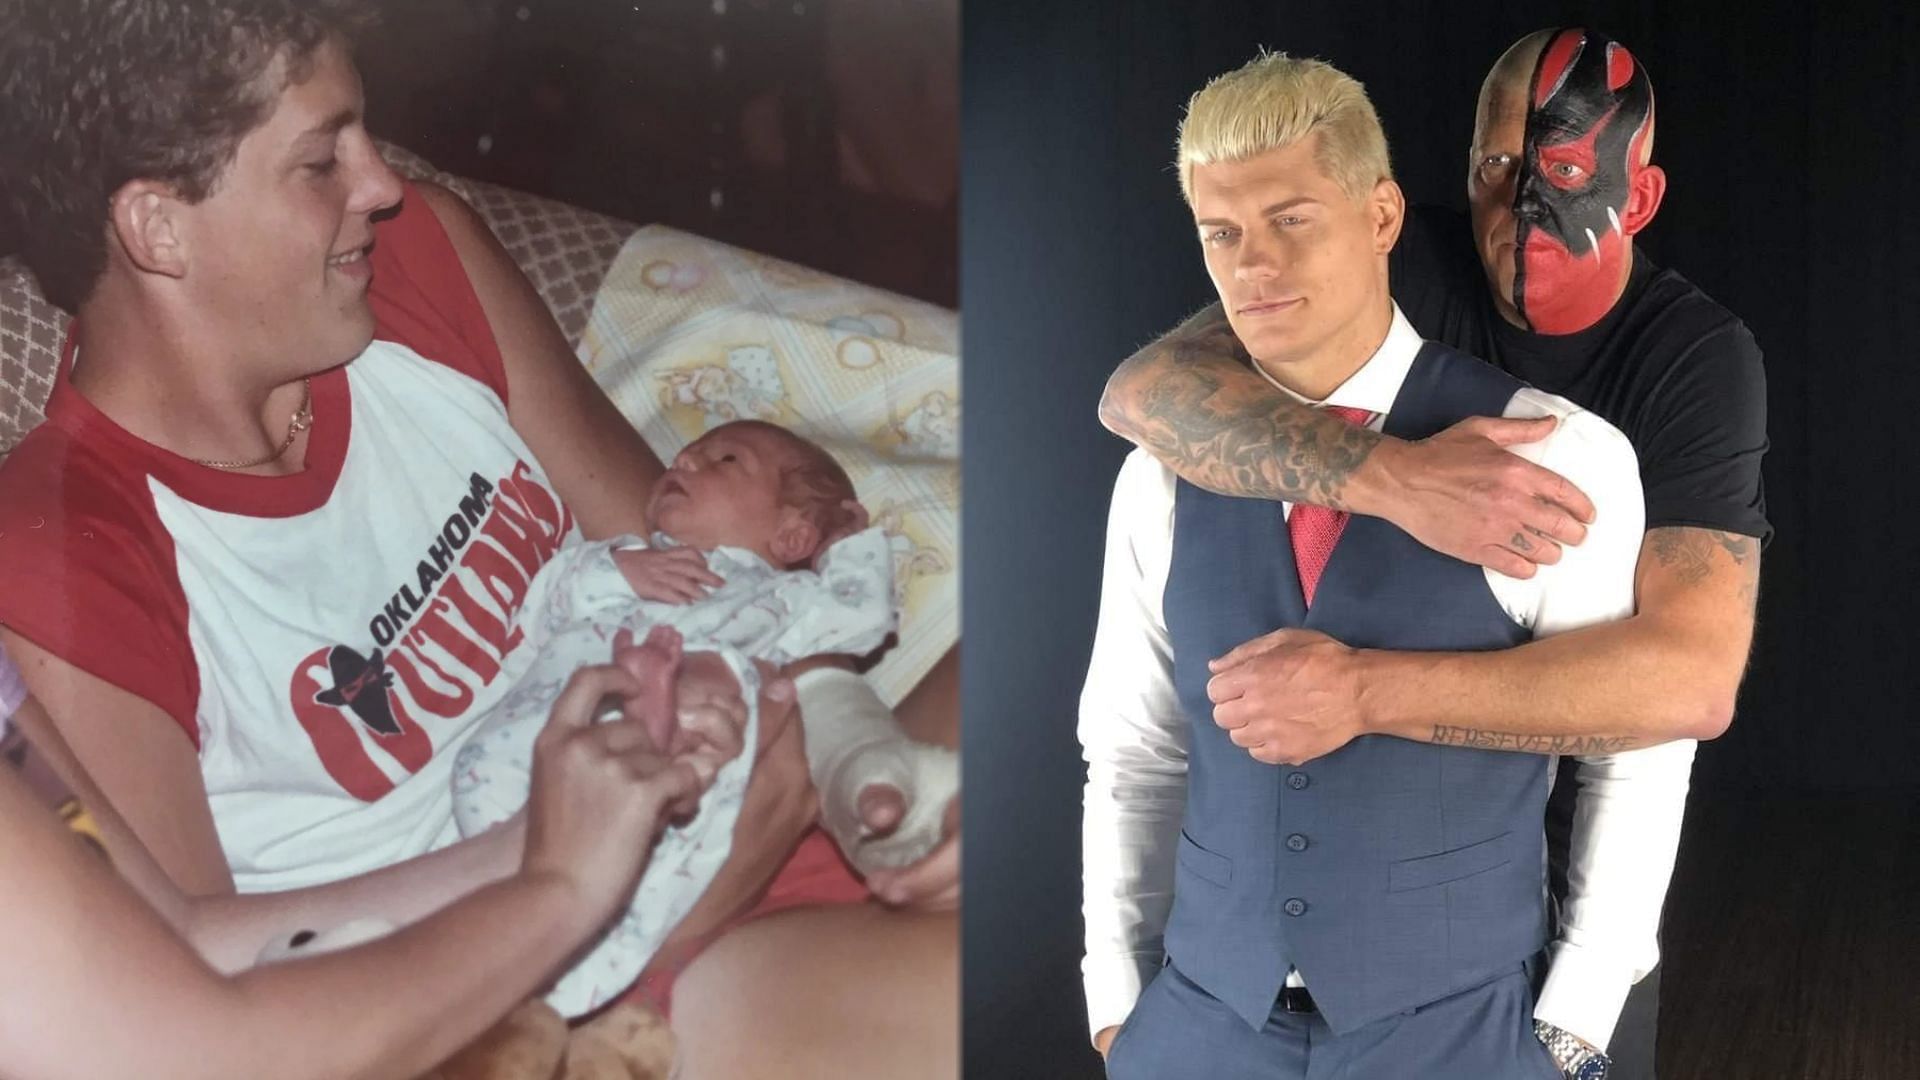 Dustin holding baby Cody (Left), the Rhodes brothers as adults (Right).